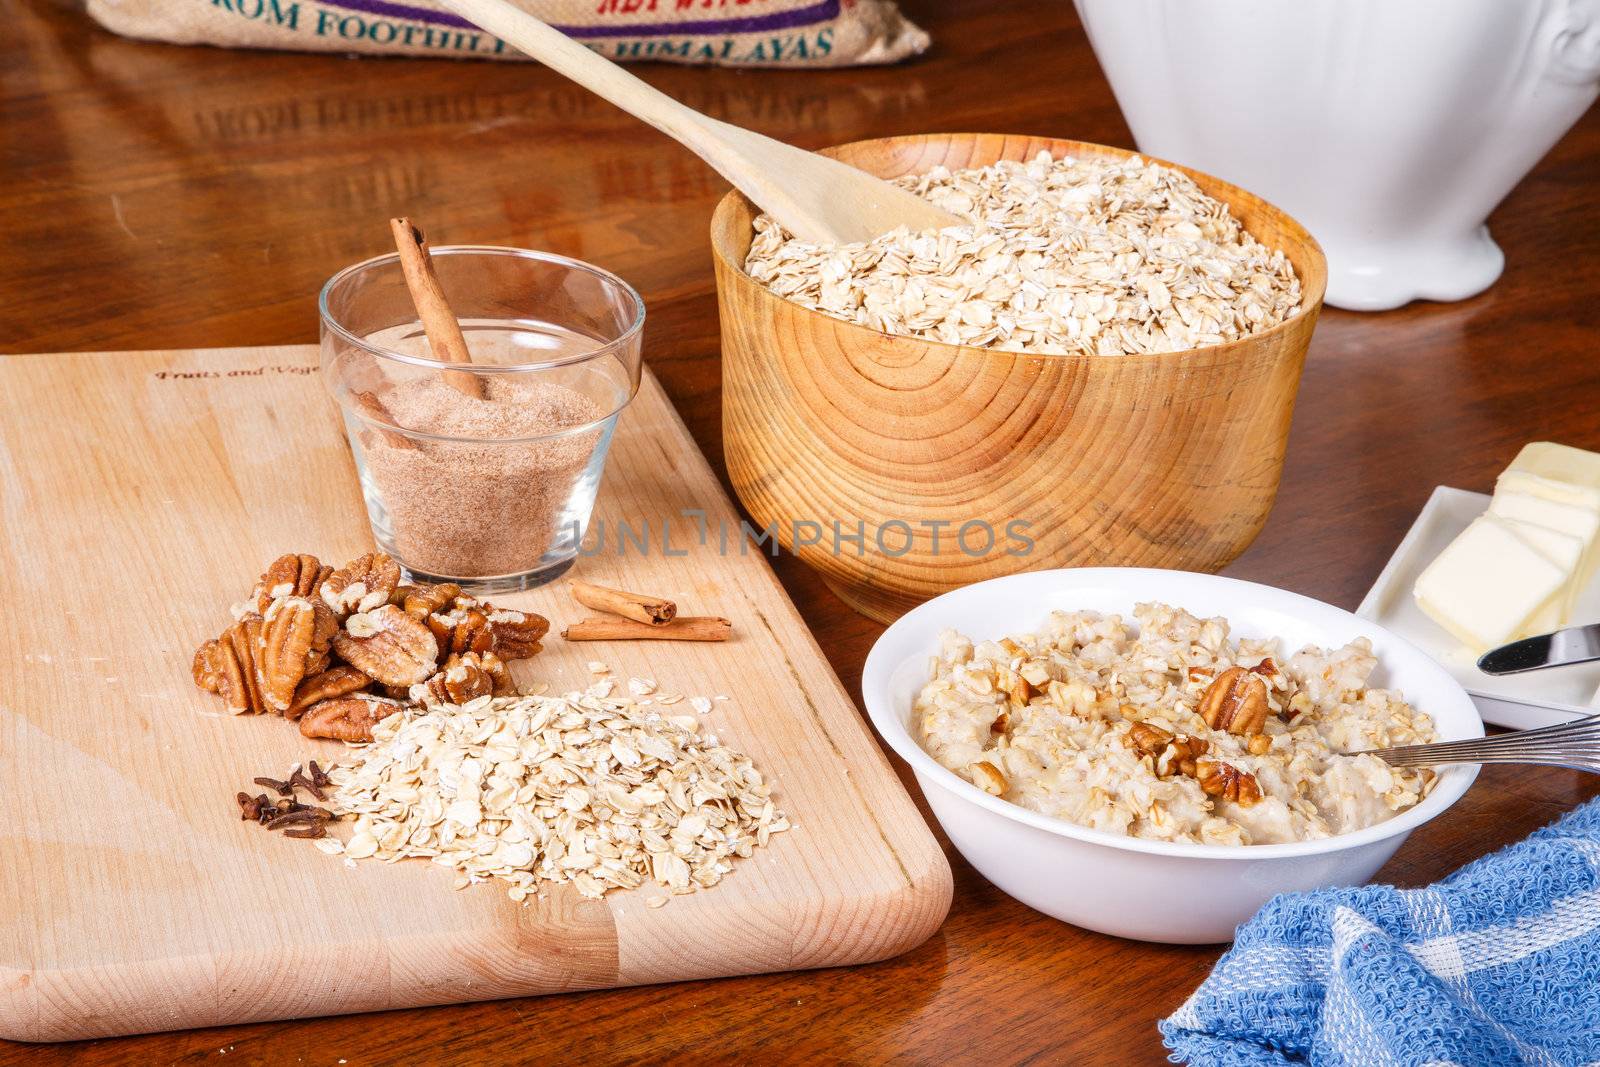 Ingredients on a table to prepare a hot bowl of oatmeal